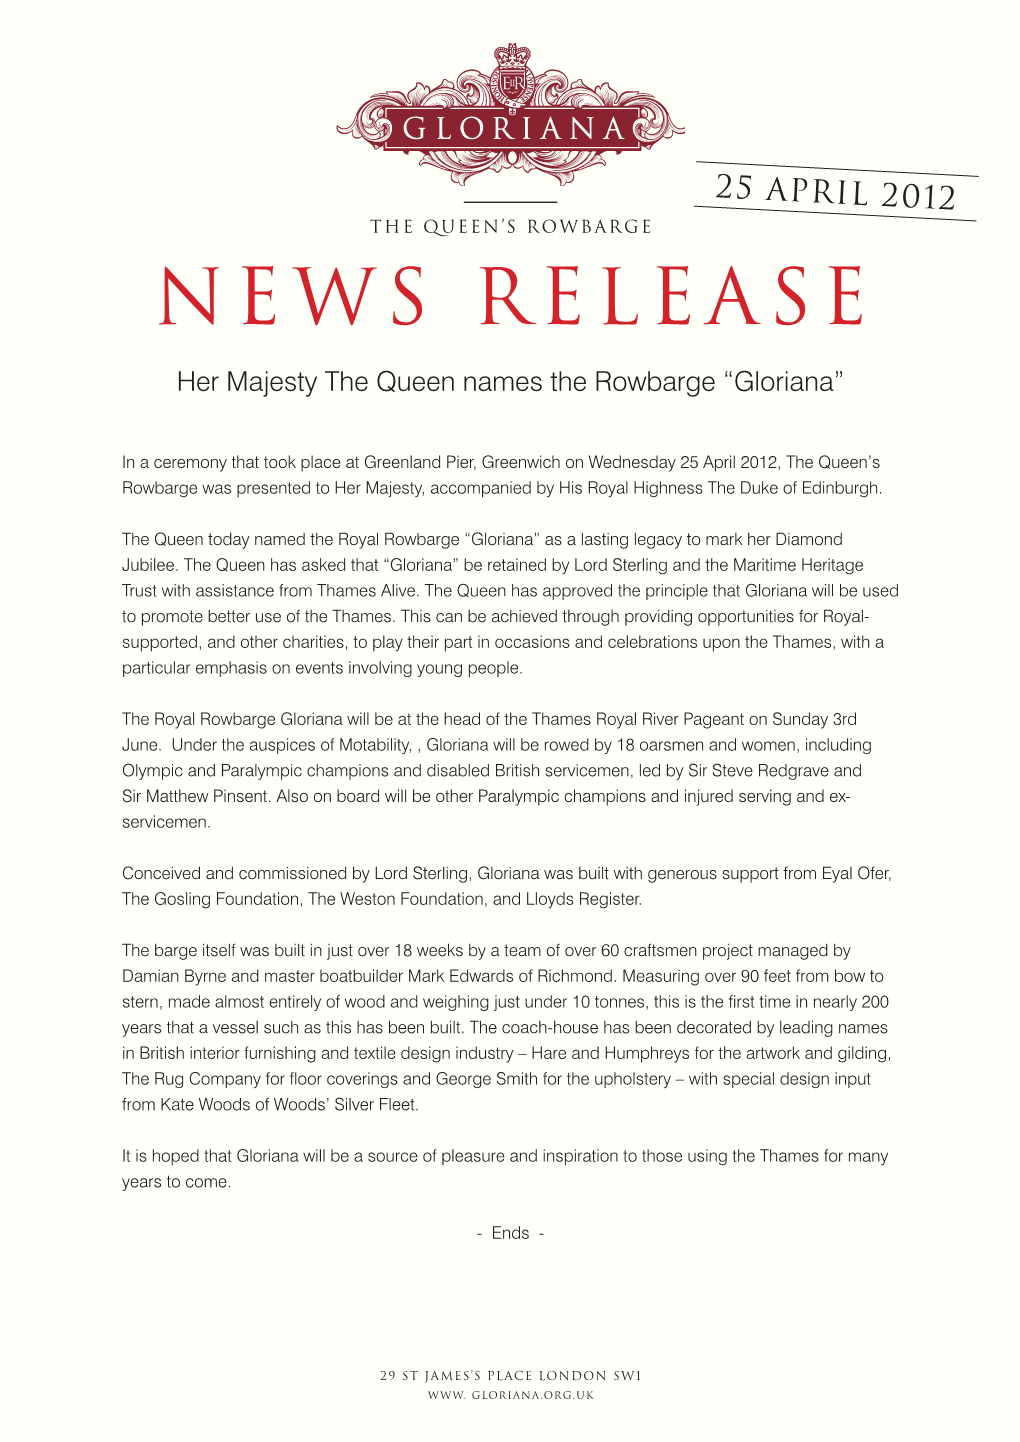 NEWS RELEASE Her Majesty the Queen Names the Rowbarge “Gloriana”